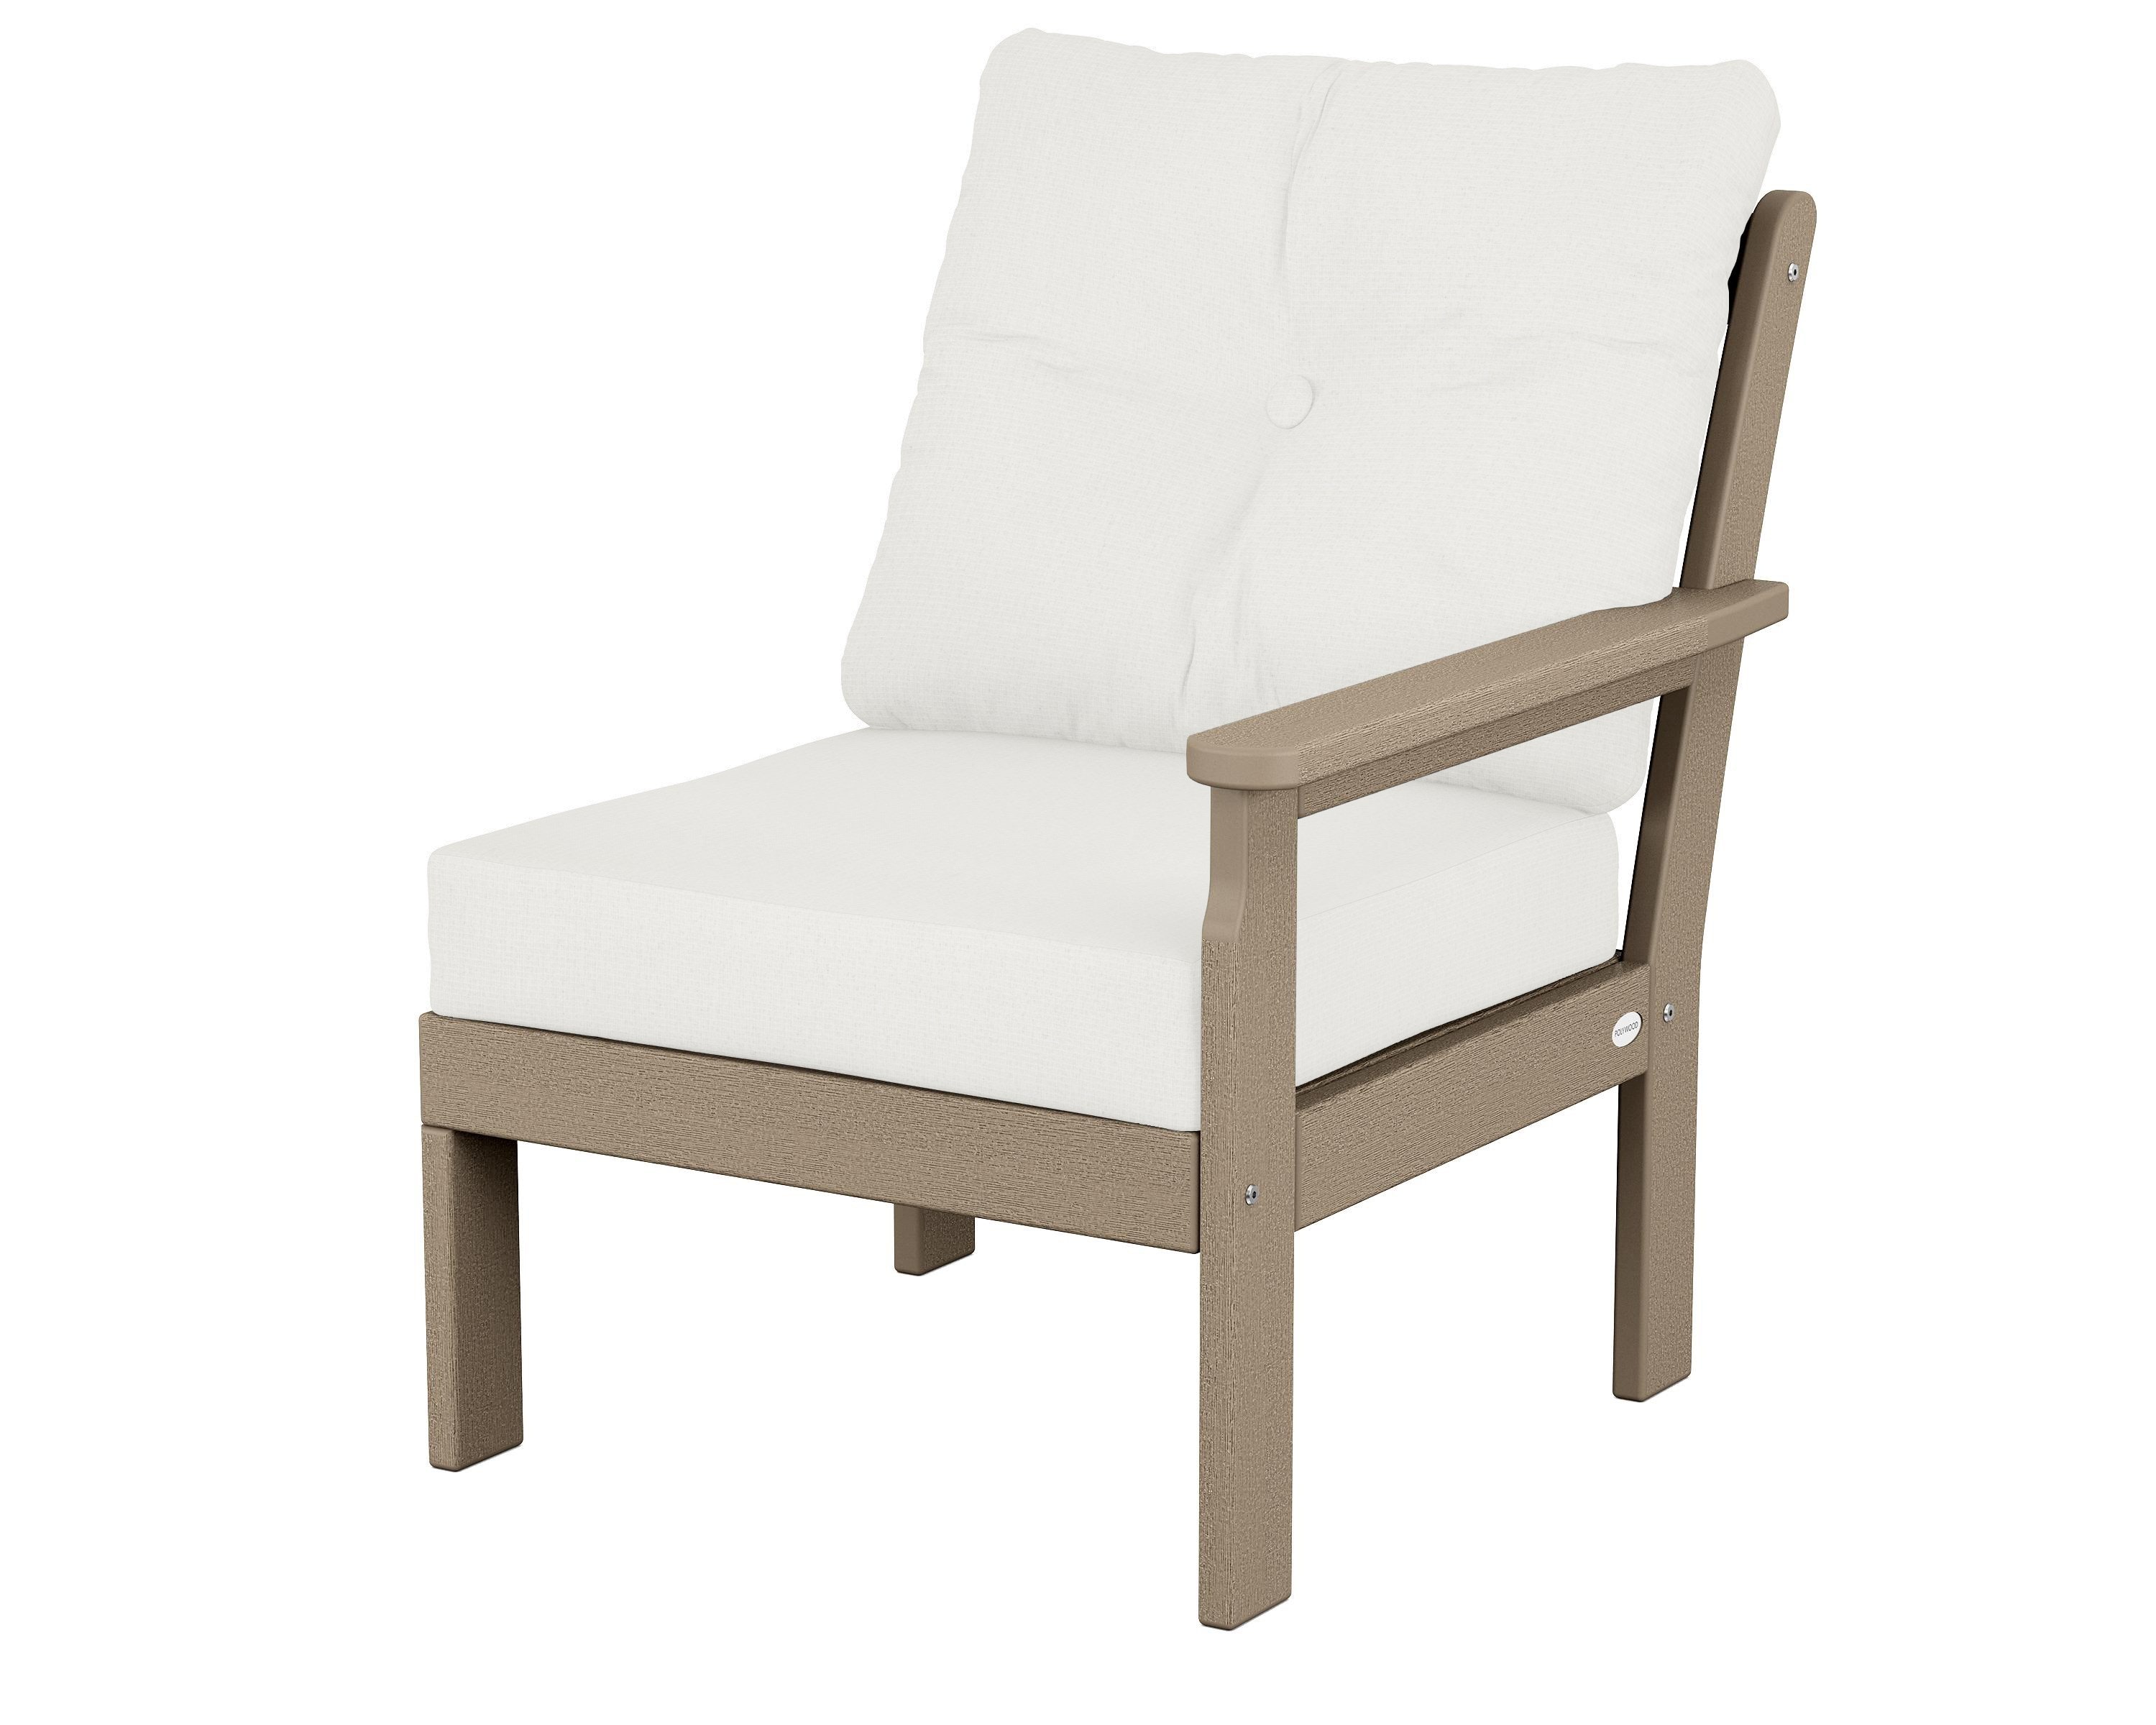 POLYWOOD Vineyard Modular Right Arm Chair in Vintage Finish